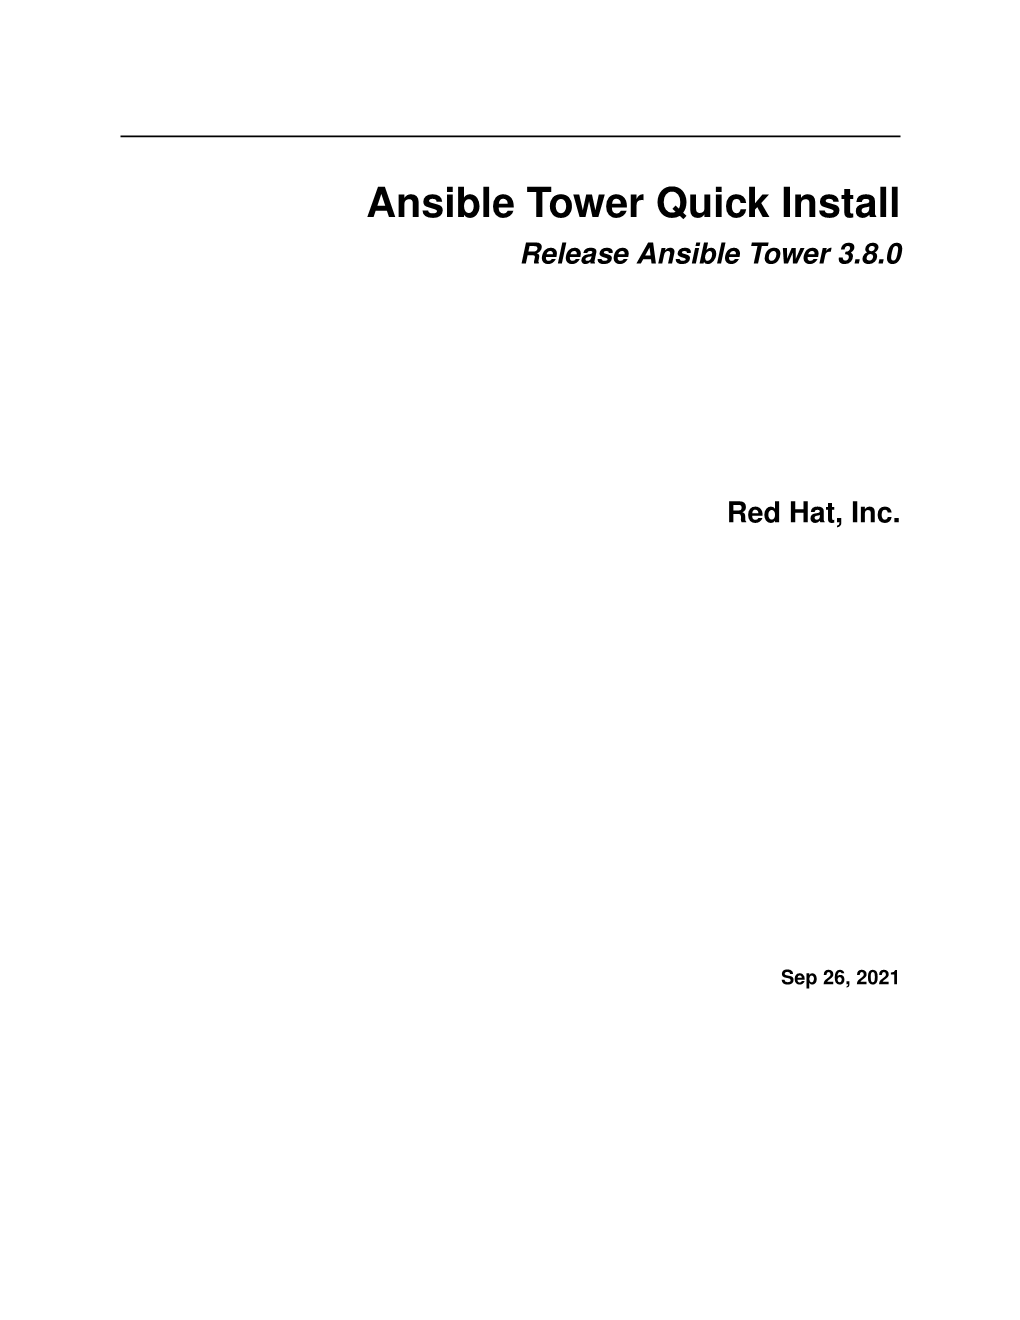 Ansible Tower Quick Install Release Ansible Tower 3.8.0